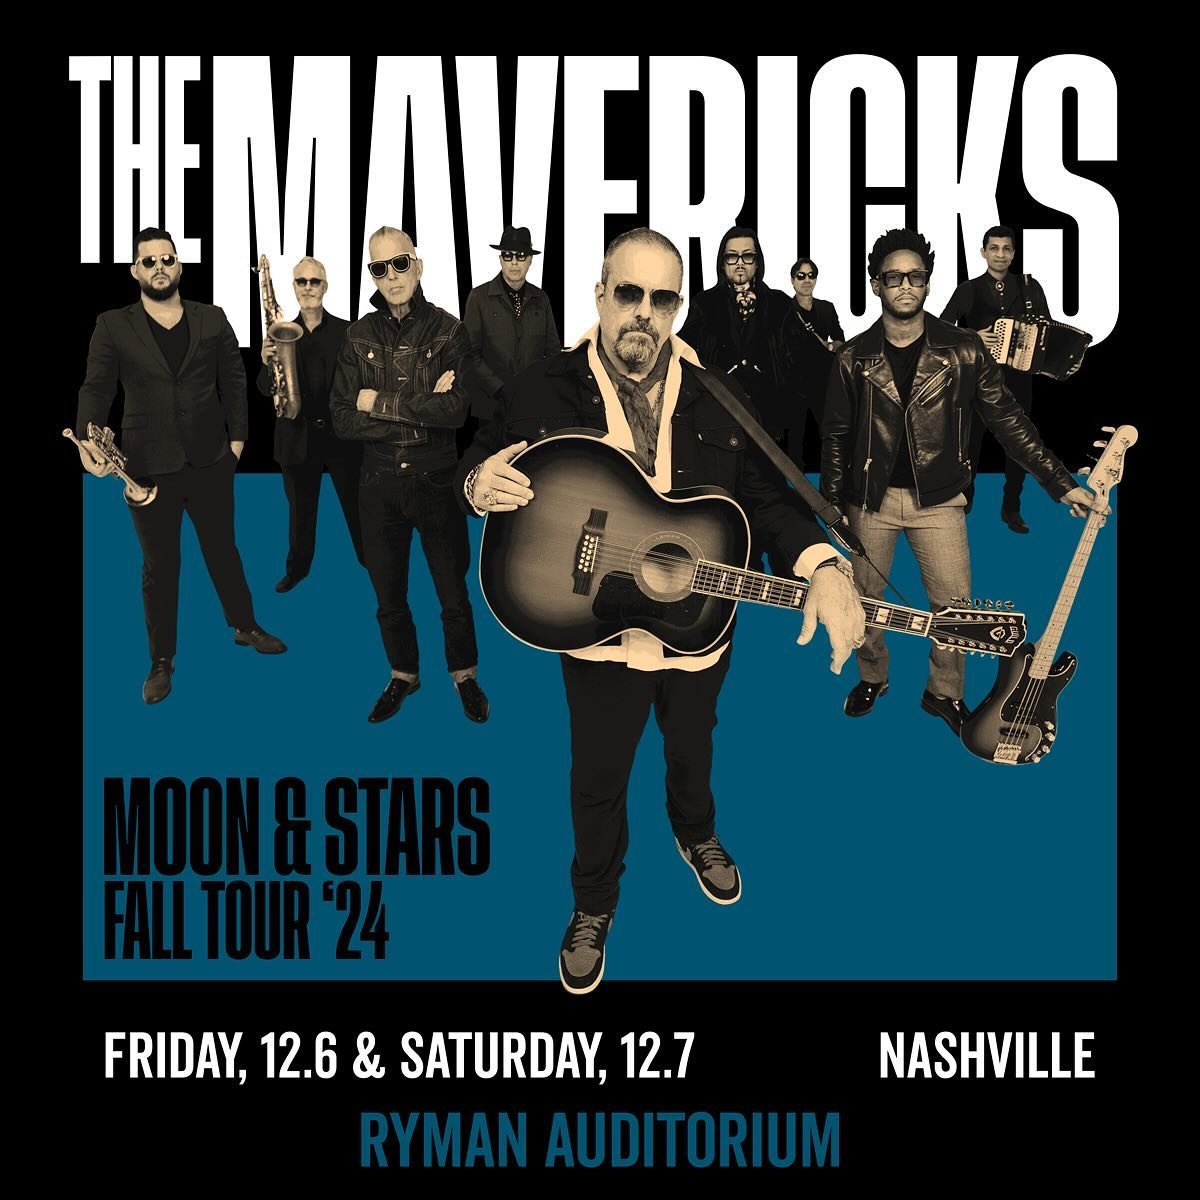 4th time&rsquo;s the charm 😉 We&rsquo;ll see you this Winter for our 4th annual 2-Night Run at Nashville&rsquo;s historic @theryman Auditorium, Friday, December 6th &amp; Saturday, December 7th! ✌️ These are some of our best shows all year and they 